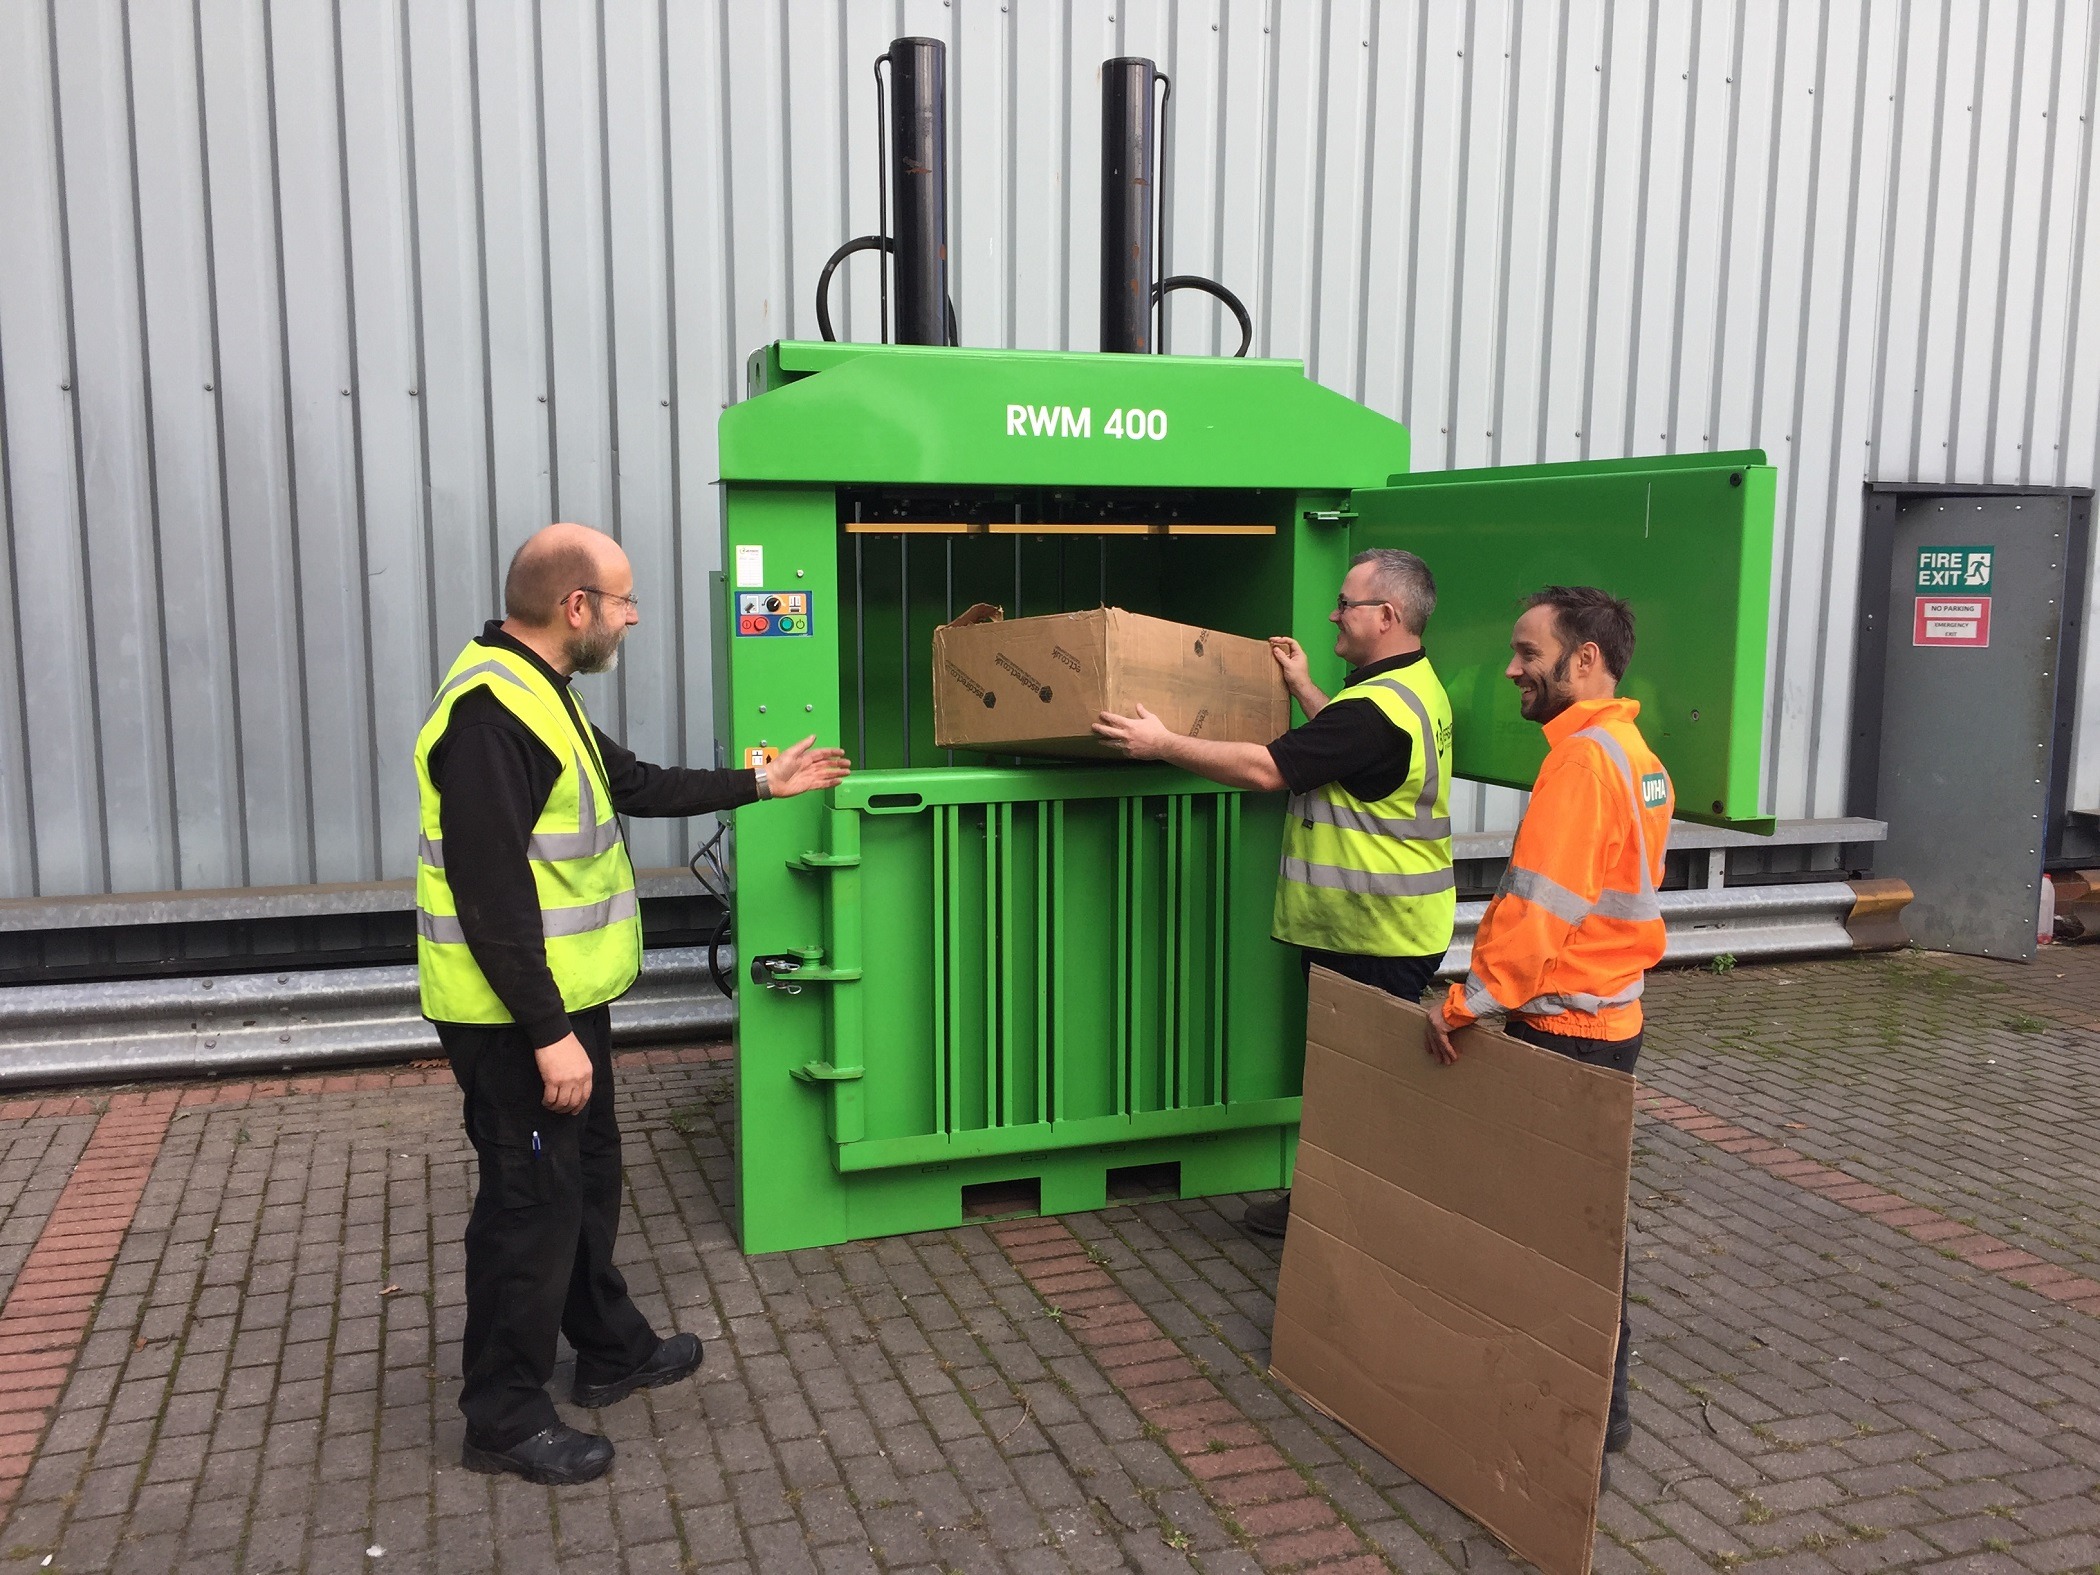 Waste baler training boosts skill-sets and safety